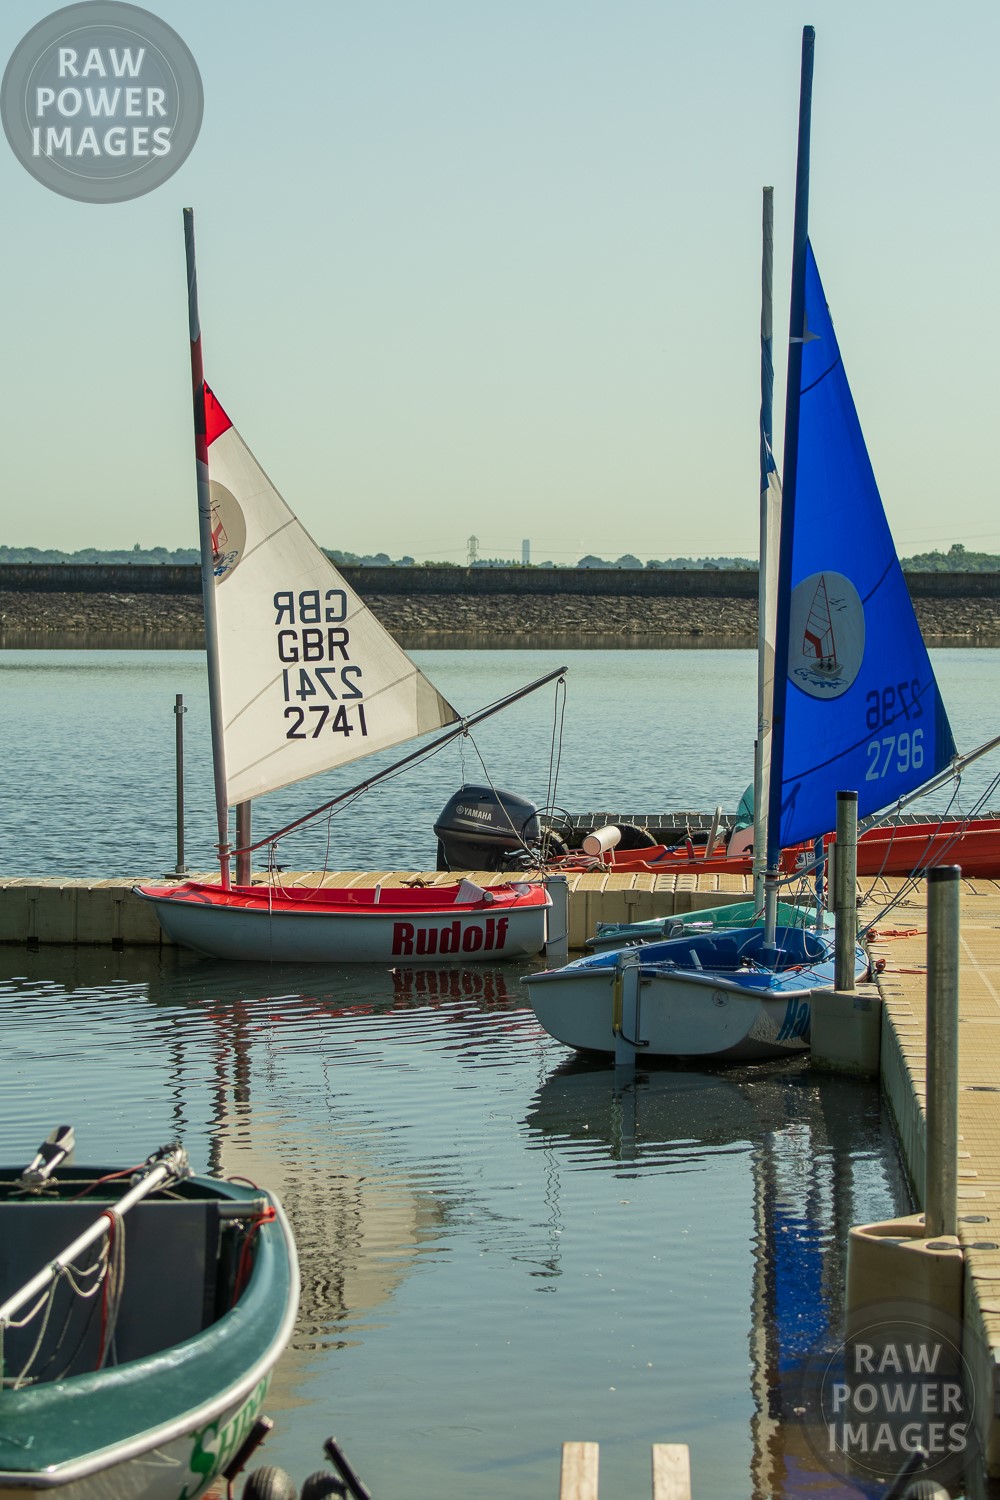 Sailability Session - Saturday 17th July